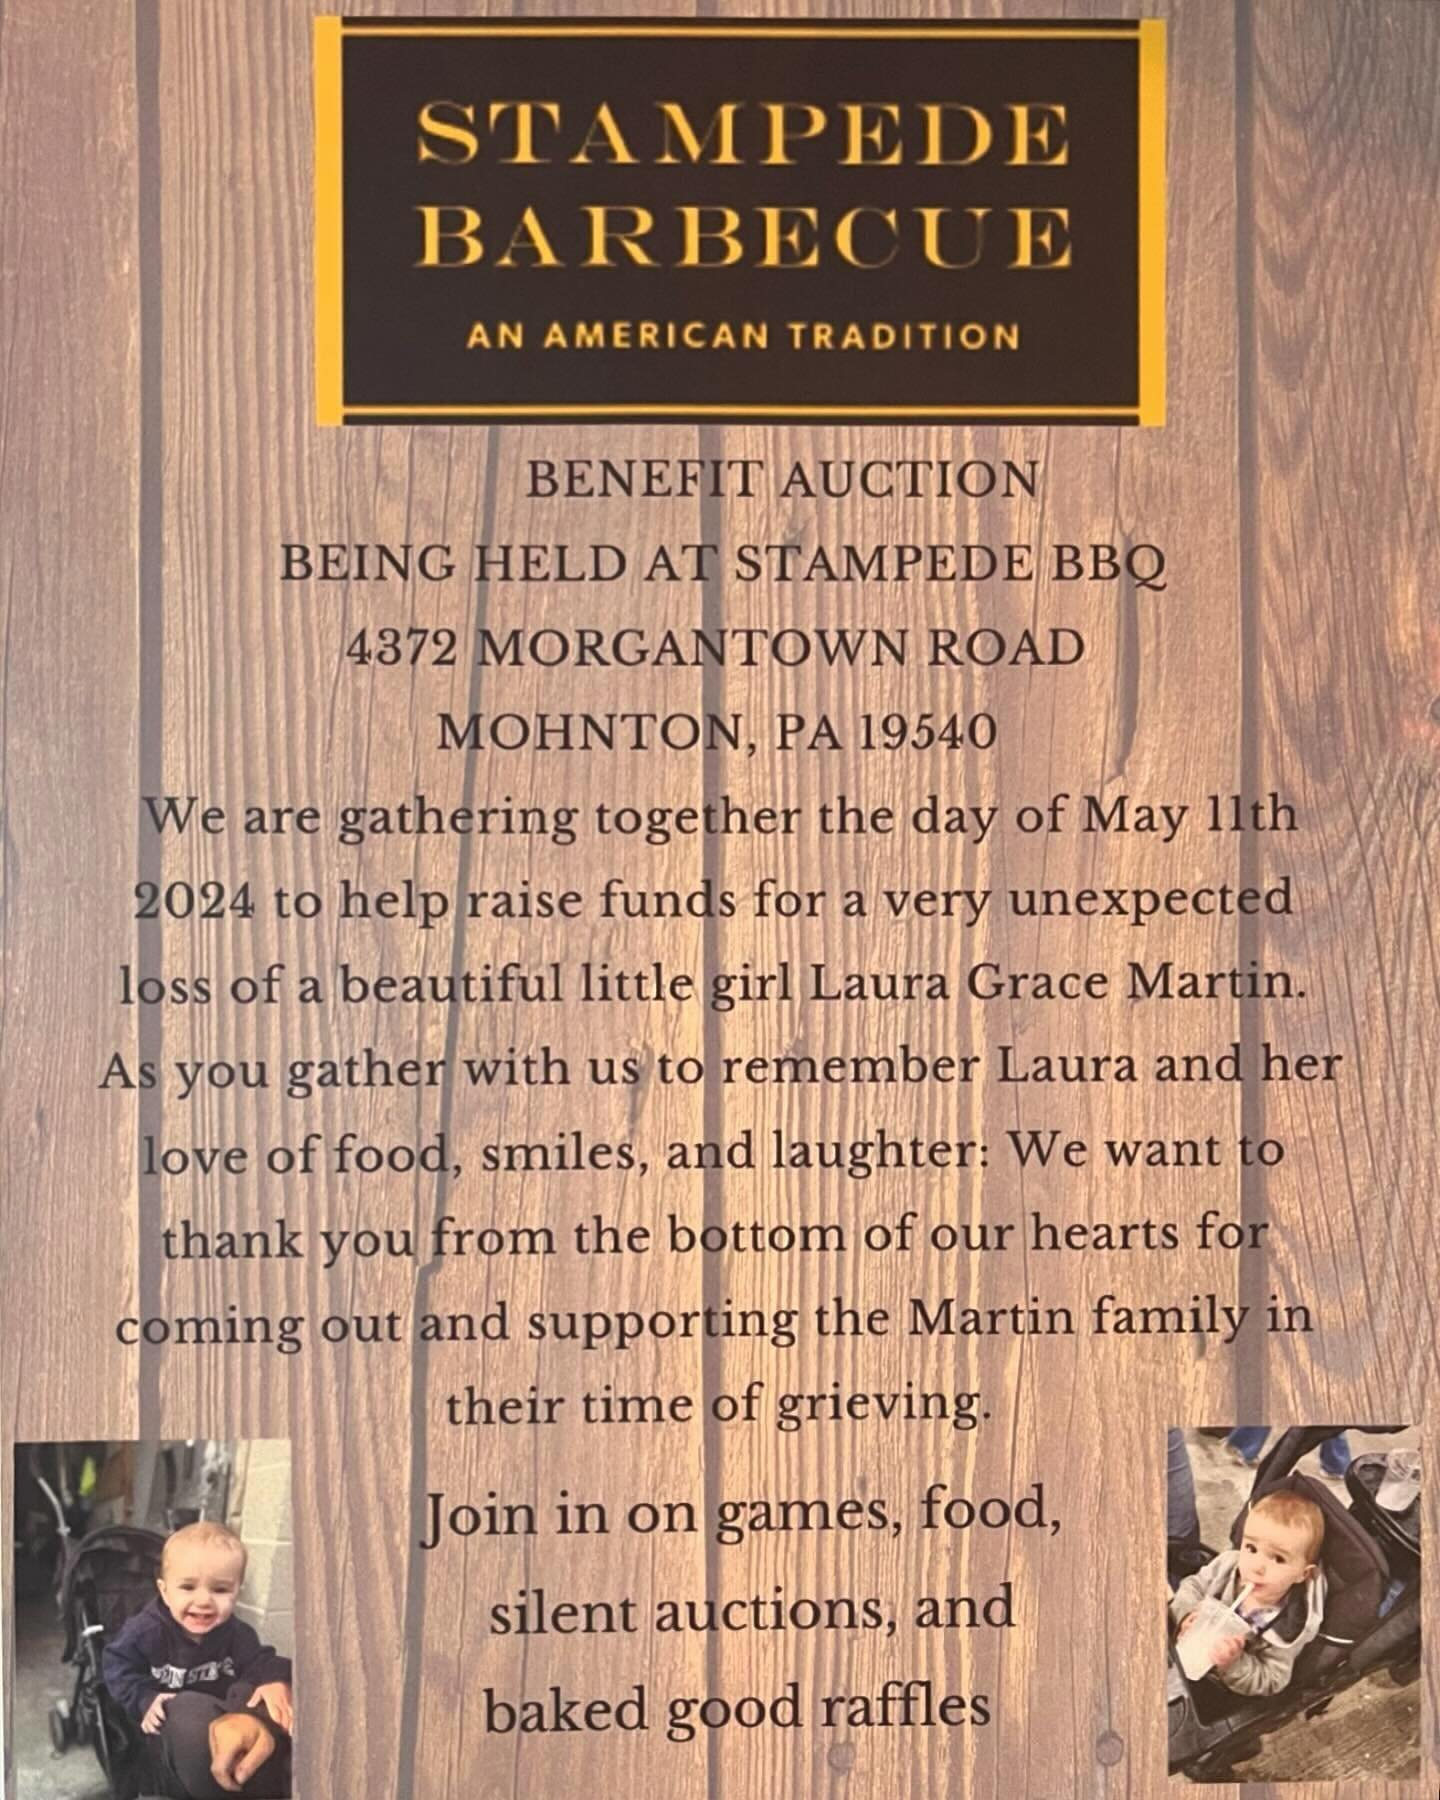 We want to send out a quick reminder of a upcoming fundraiser we are holding! On May 11th, all day at our Mohnton restaurant we will be raising funds for a close family that tragically lost their little girl recently. Many amazing donations have been